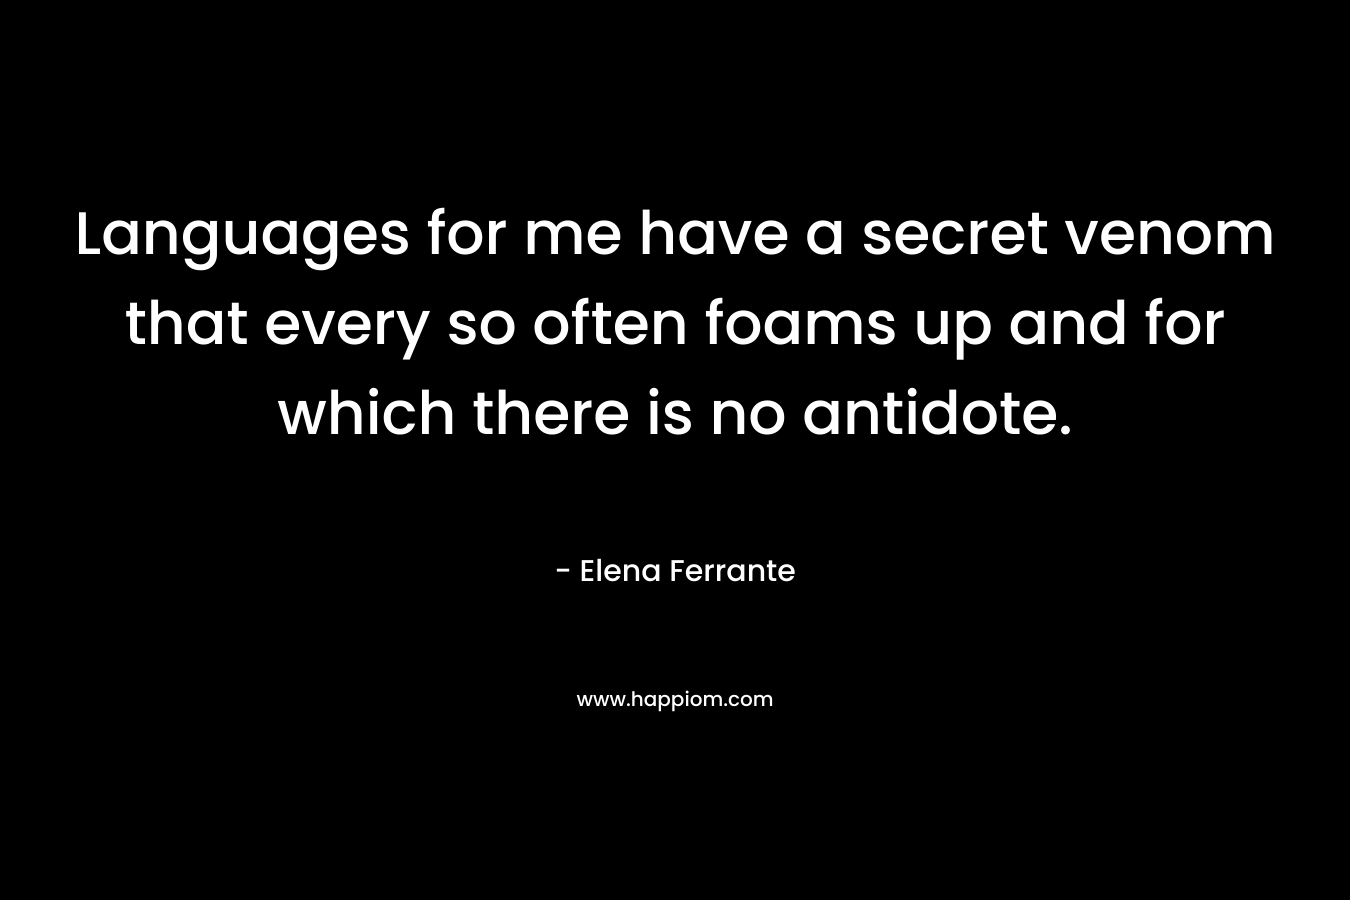 Languages for me have a secret venom that every so often foams up and for which there is no antidote. – Elena Ferrante